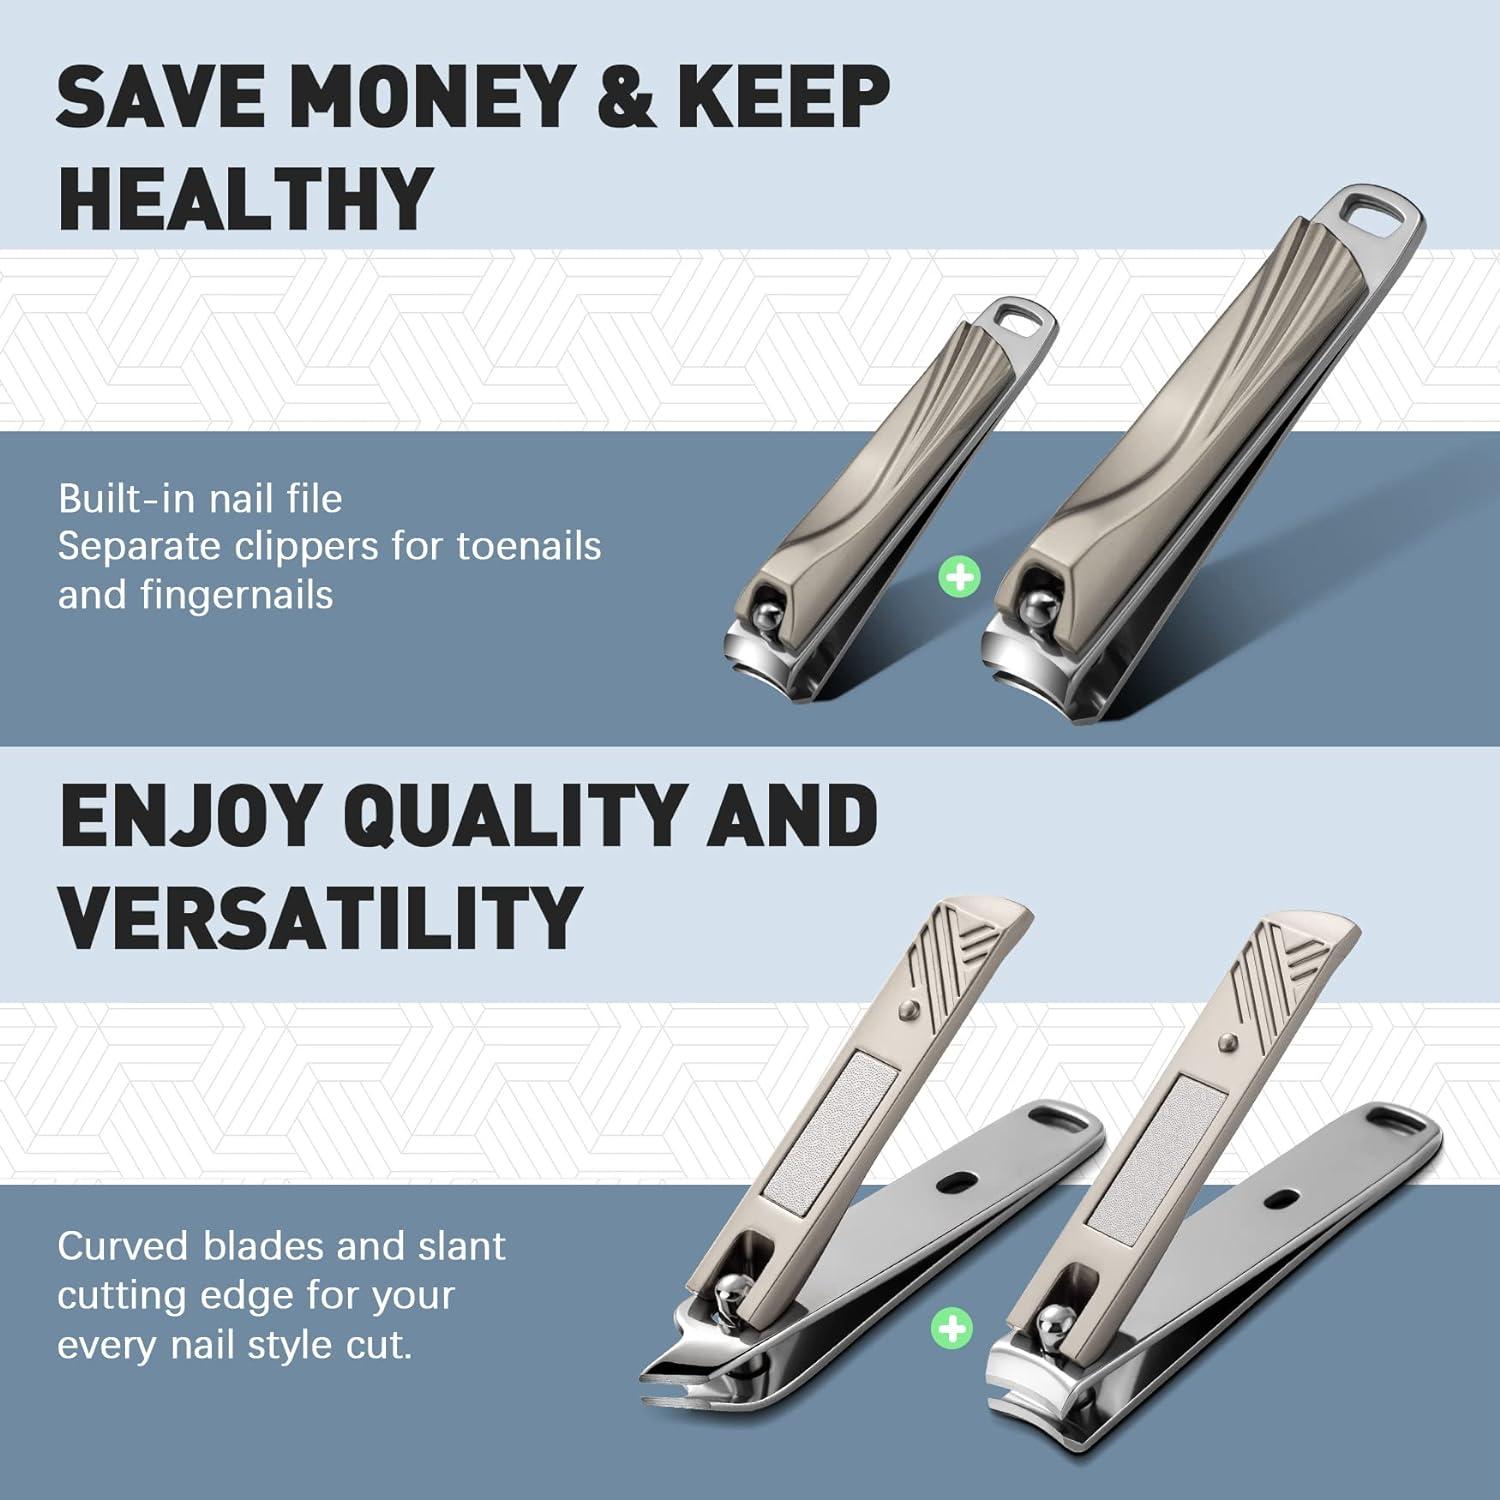 BEZOX Nail Clippers 3 Pcs - Heavy Duty Stainless Steel Straight